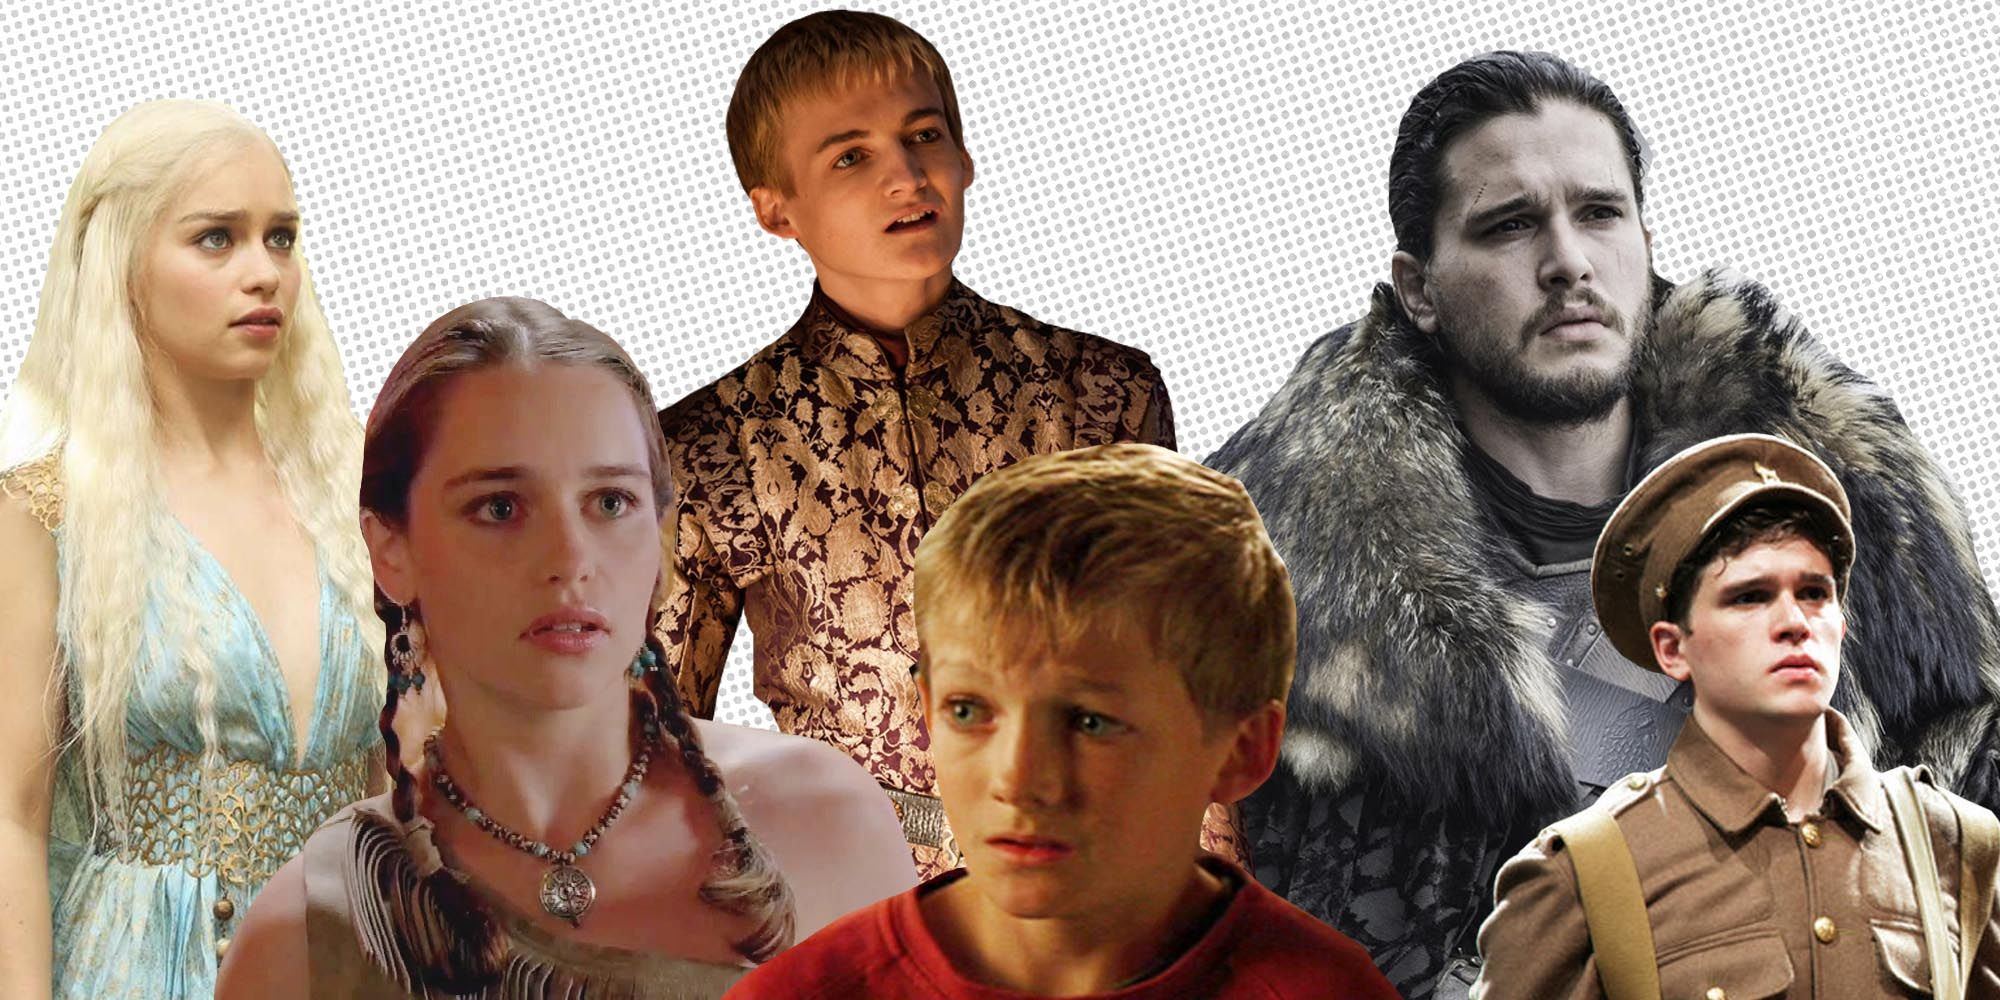 The Cast Remembers: 'Game of Thrones' actors tell all in recent video